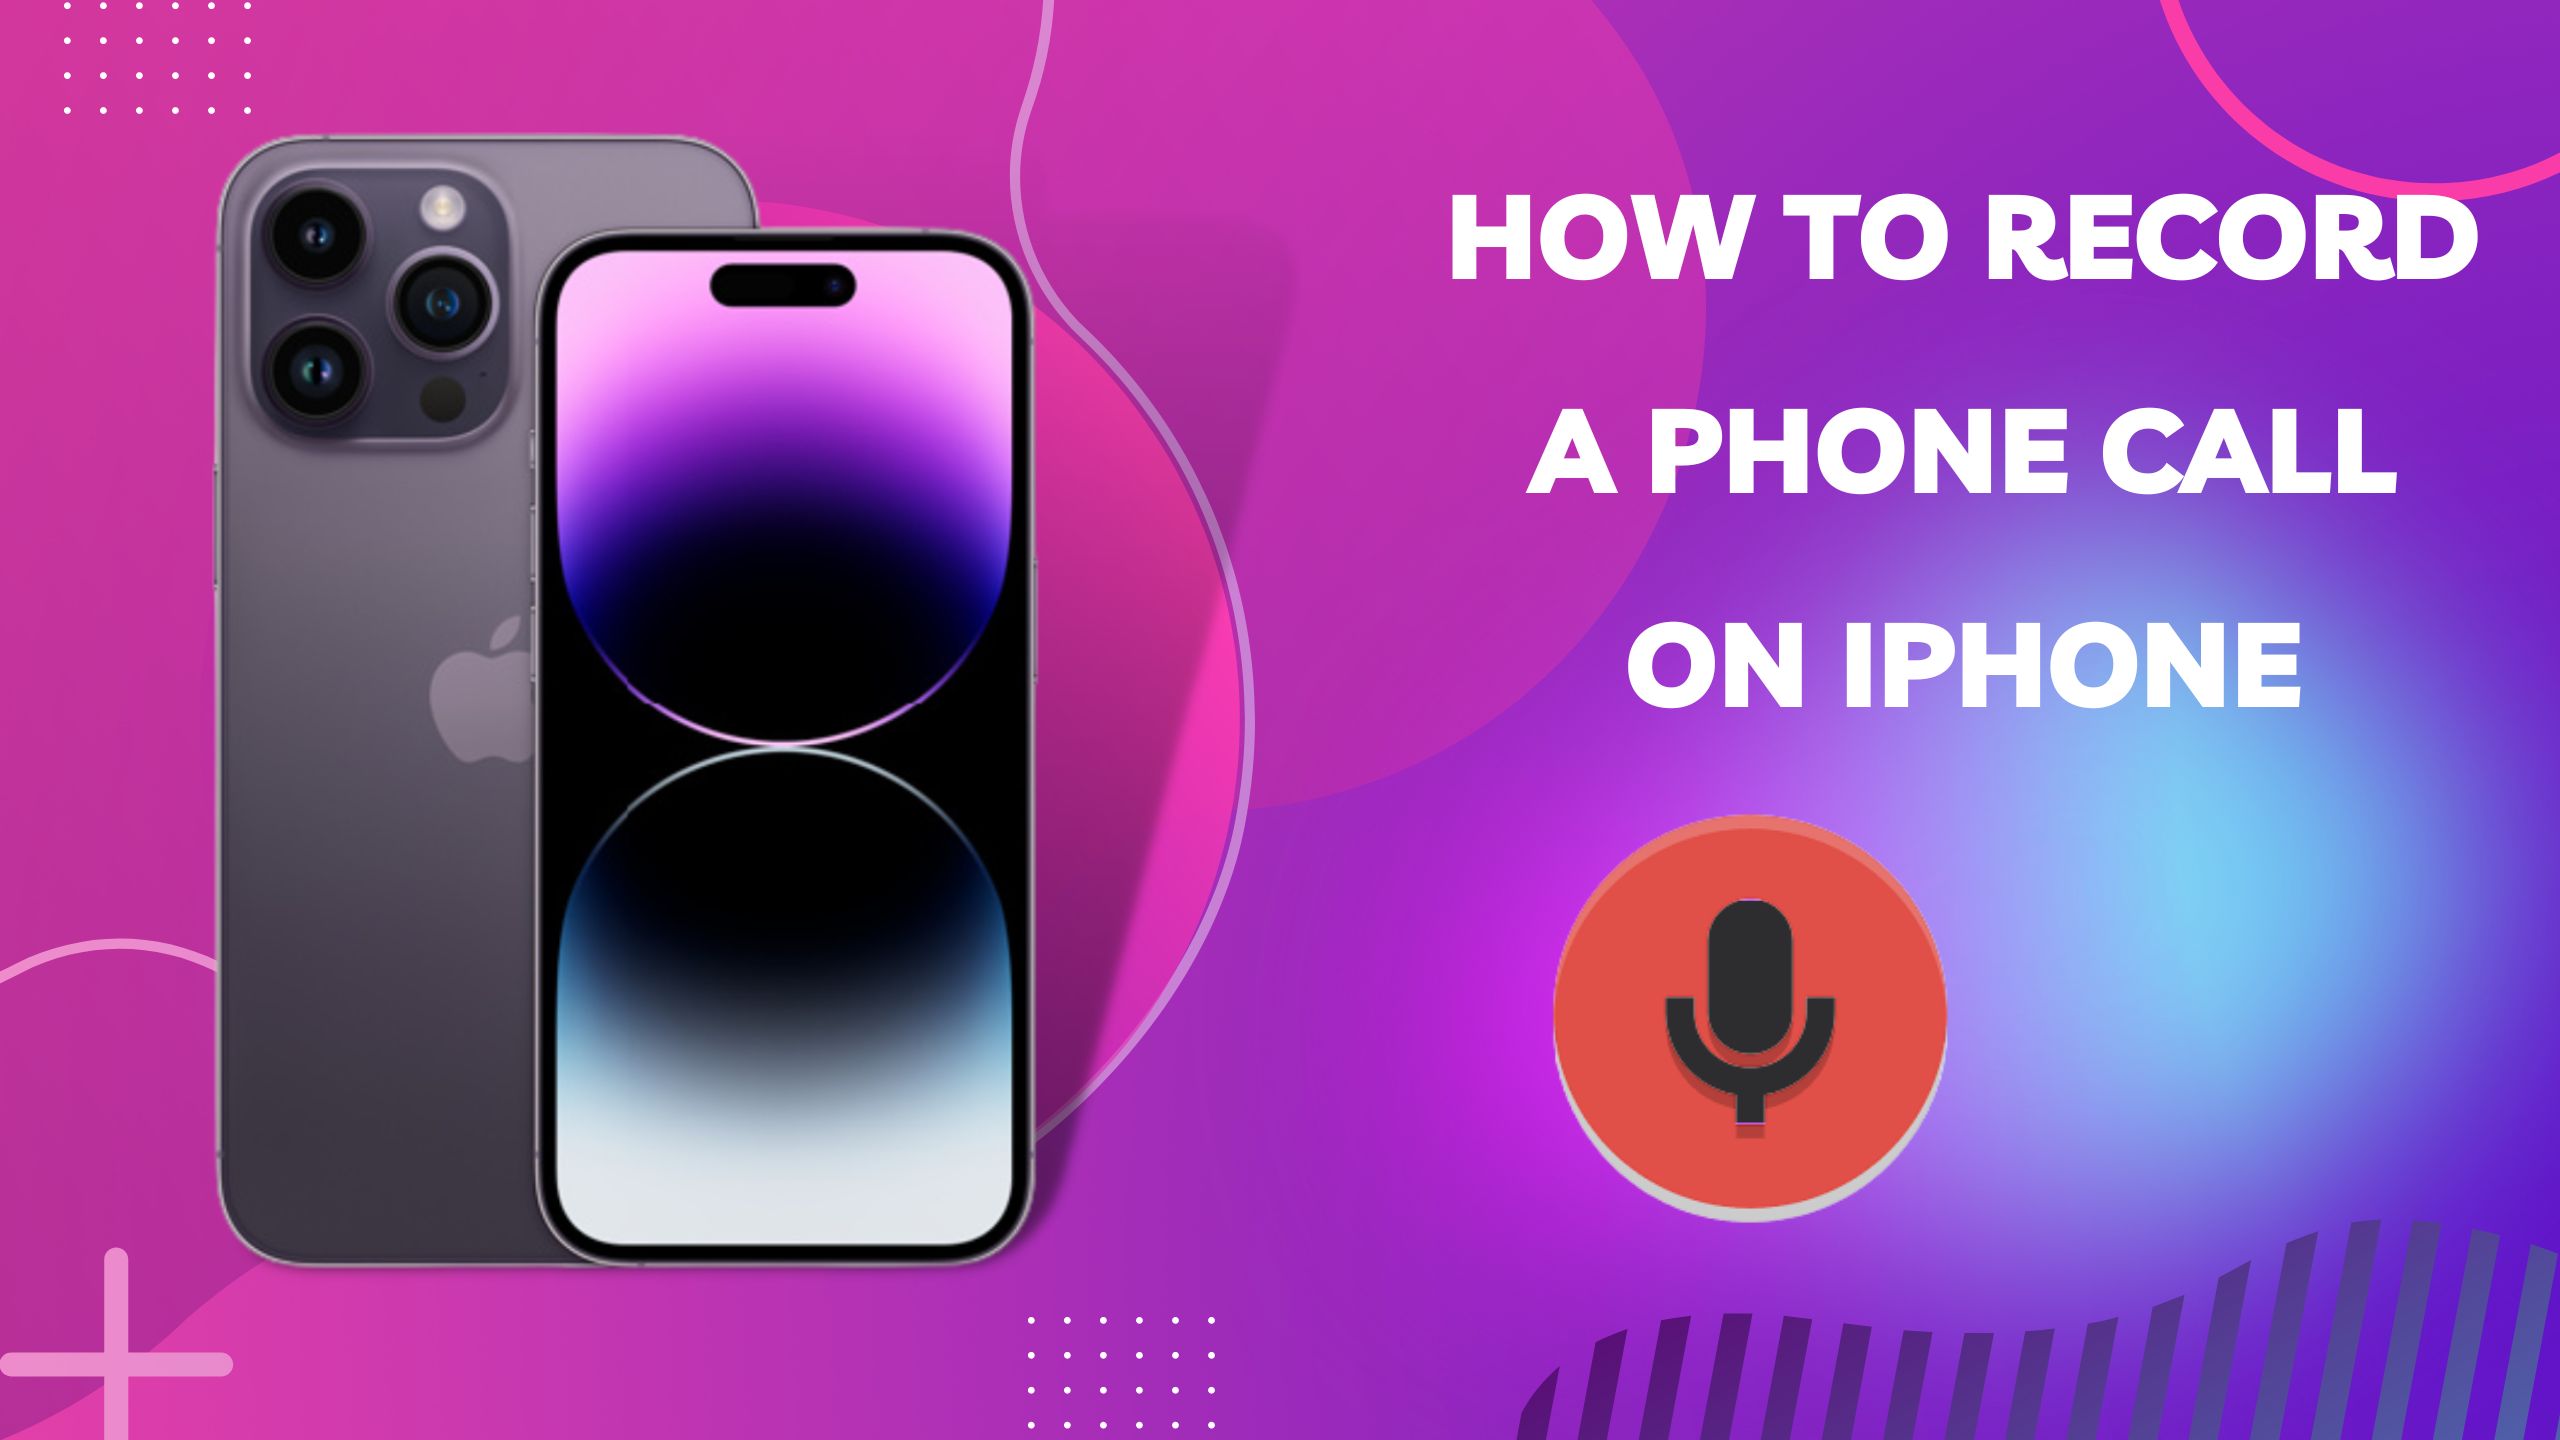 How to record a phone call on iPhone